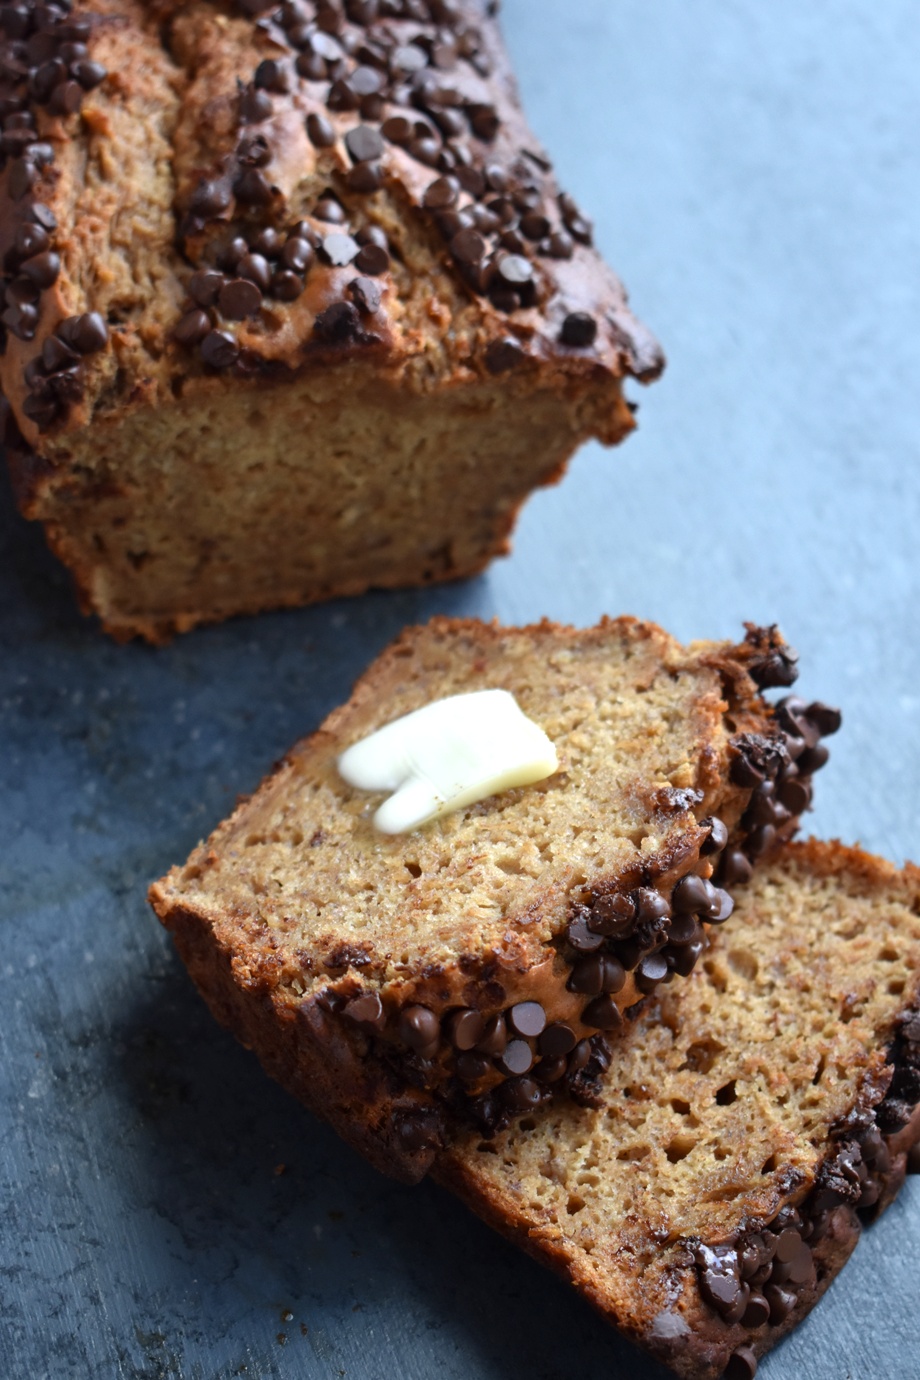 Banana bread with butter